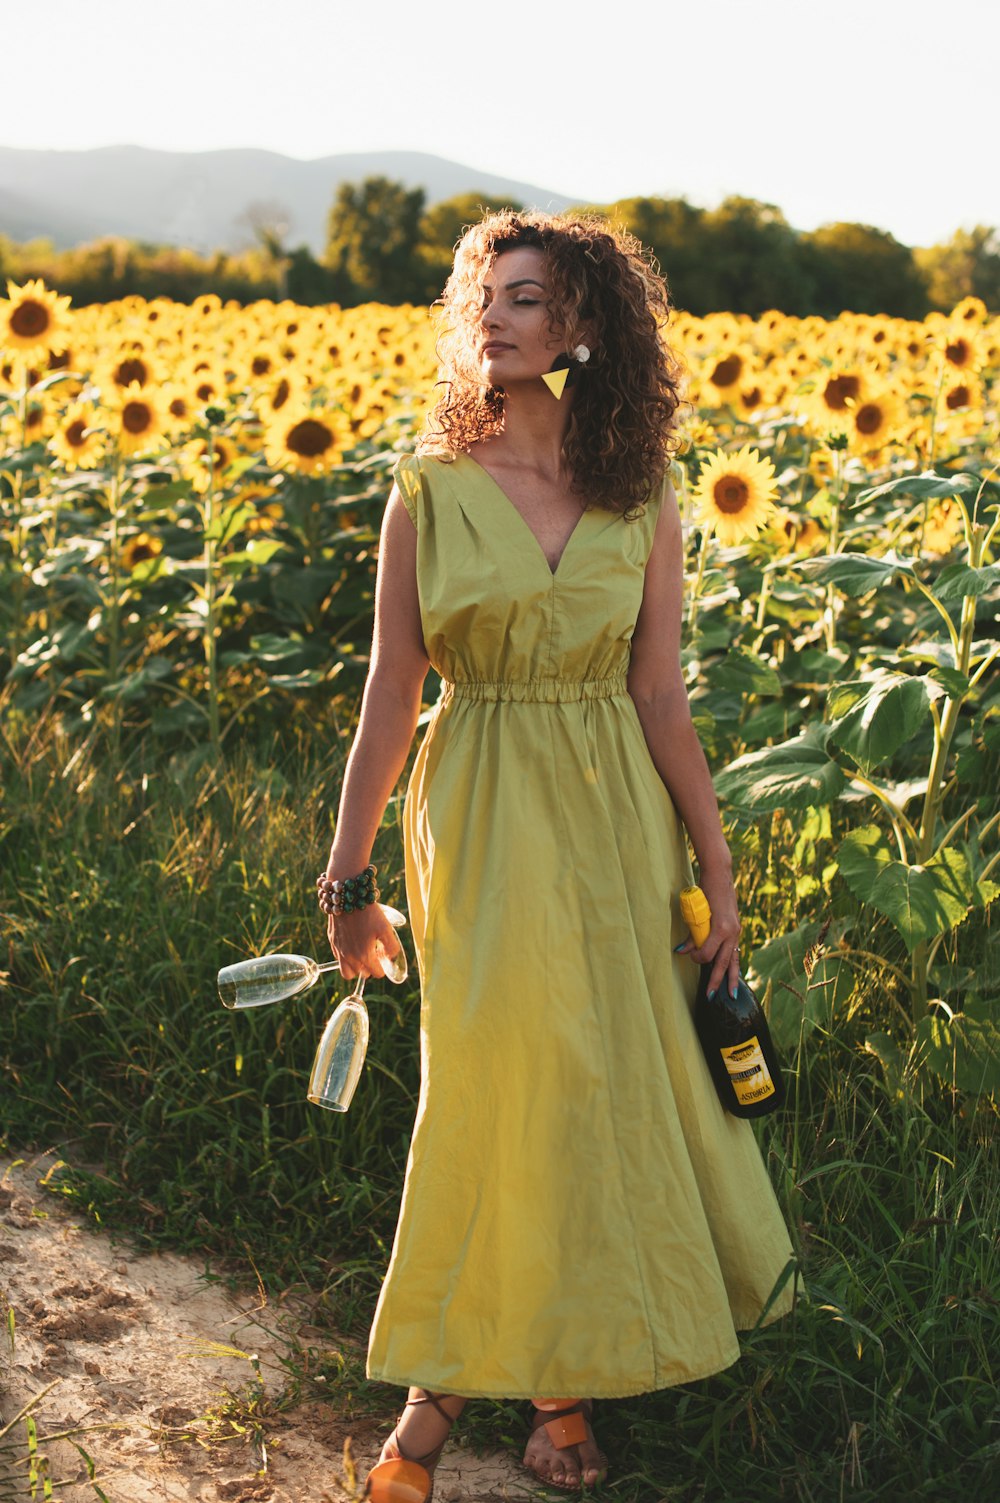 woman in yellow sleeveless dress holding white and black hair brush standing on yellow flower field